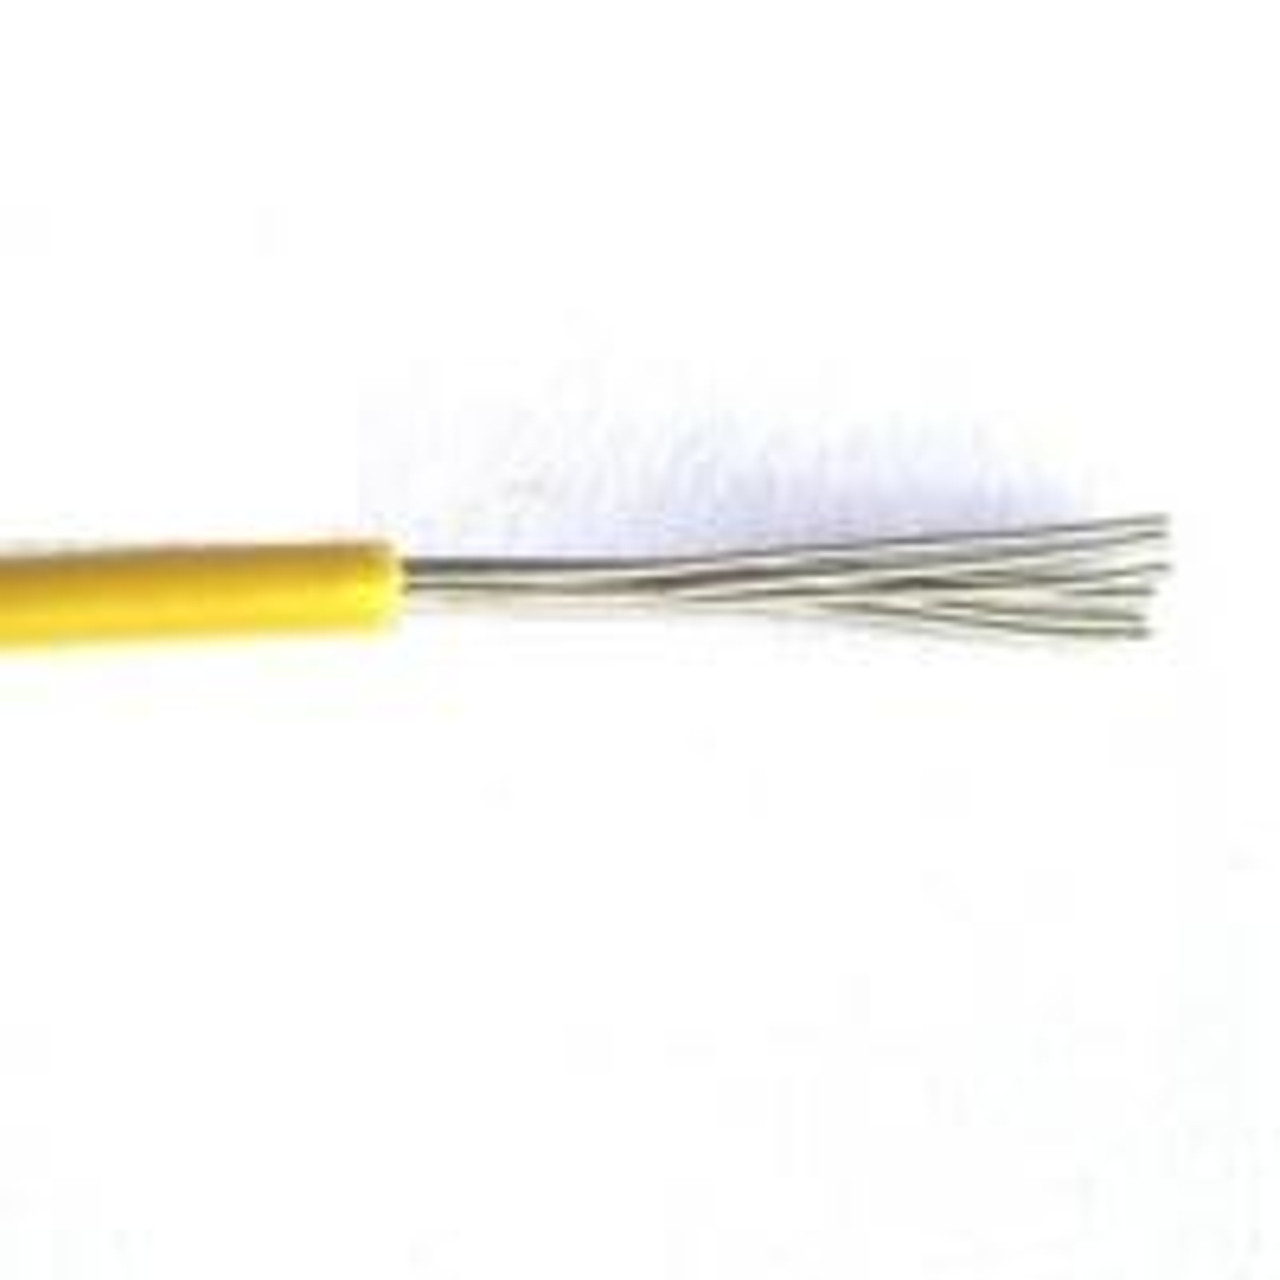 Stranded 26 Gauge Guitar Circuit Wire-Yellow